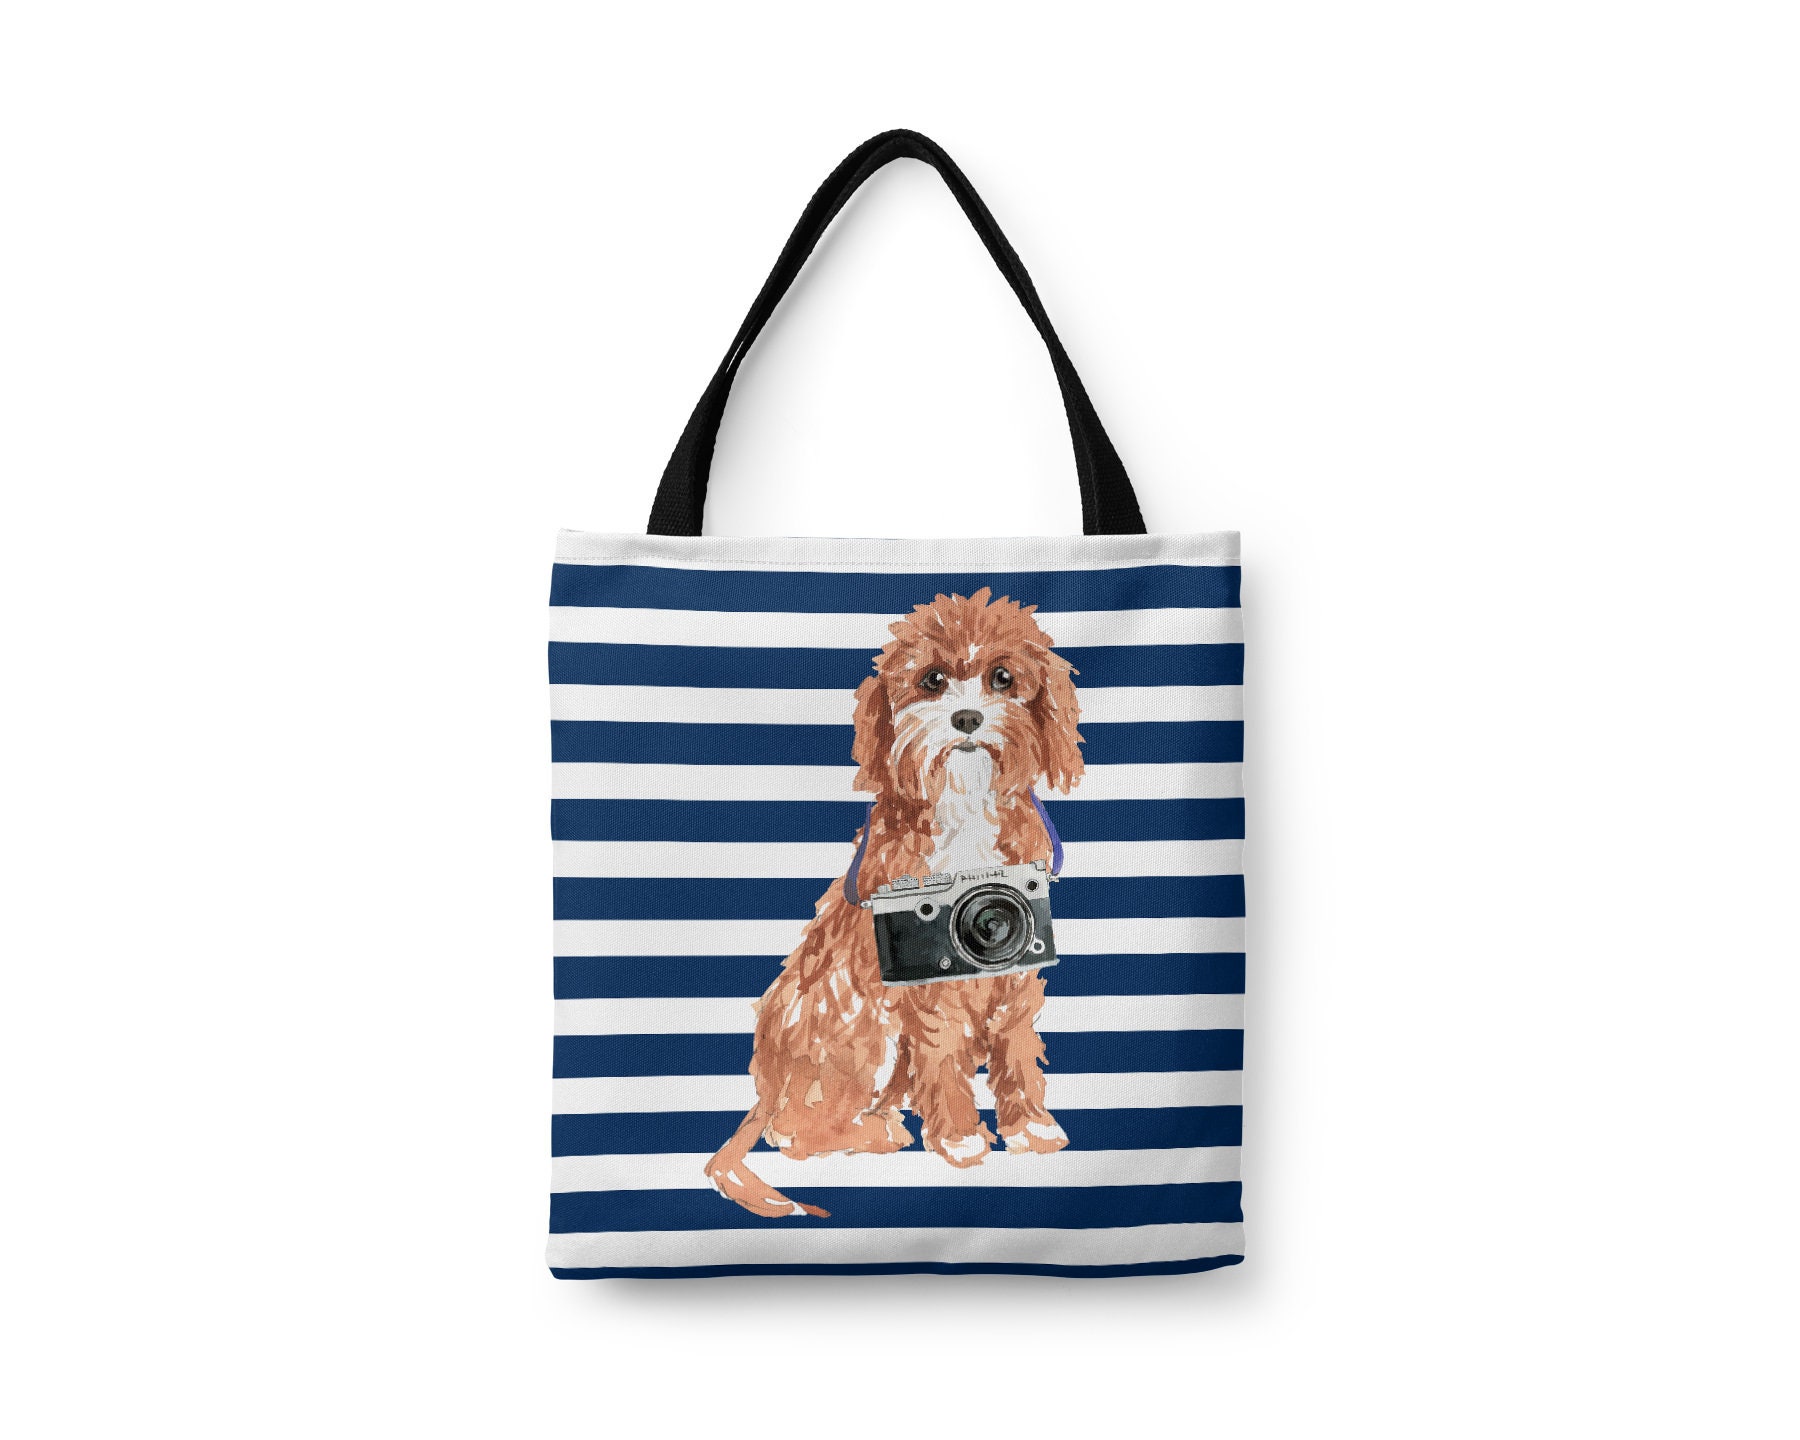 Cavapoo Dog Tote Bag - Illustrated Dogs & 6 Travel Inspired Styles. All Purpose For Work, Shopping, Life. Cavoodle, Cavoo Bag